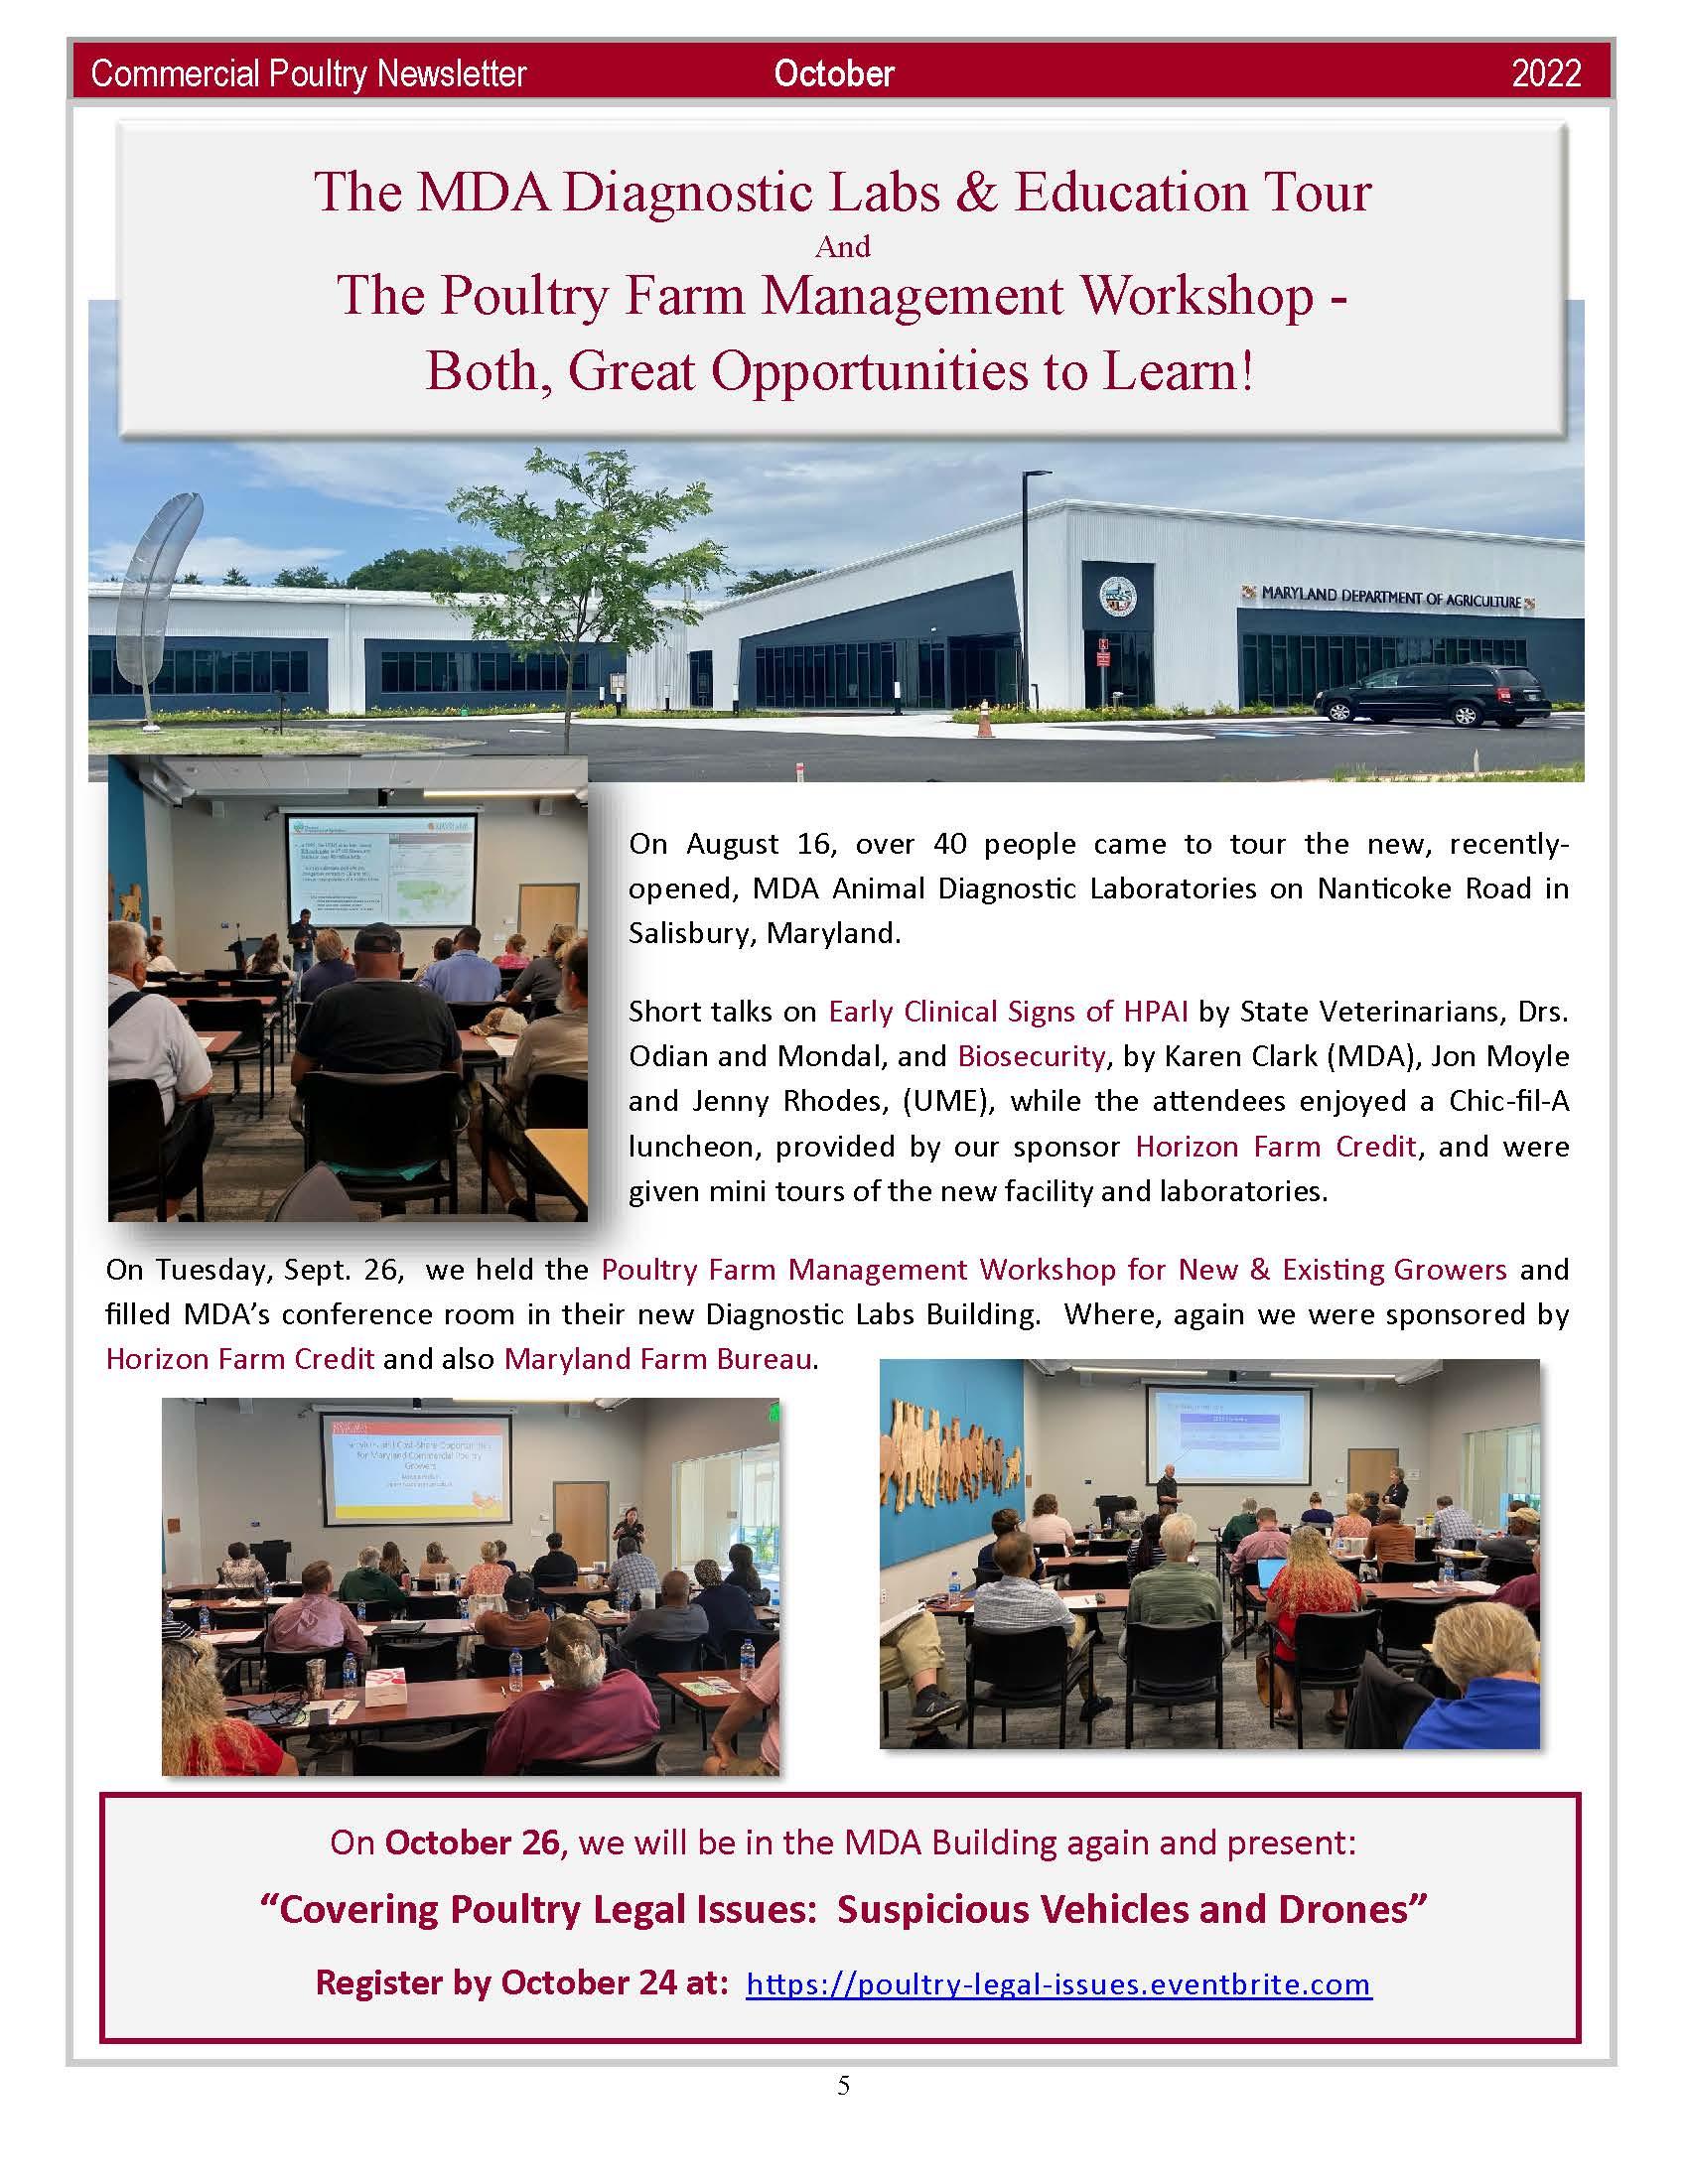 Page 5 of Com Poultry News Oct 2022 showing MDA and participants